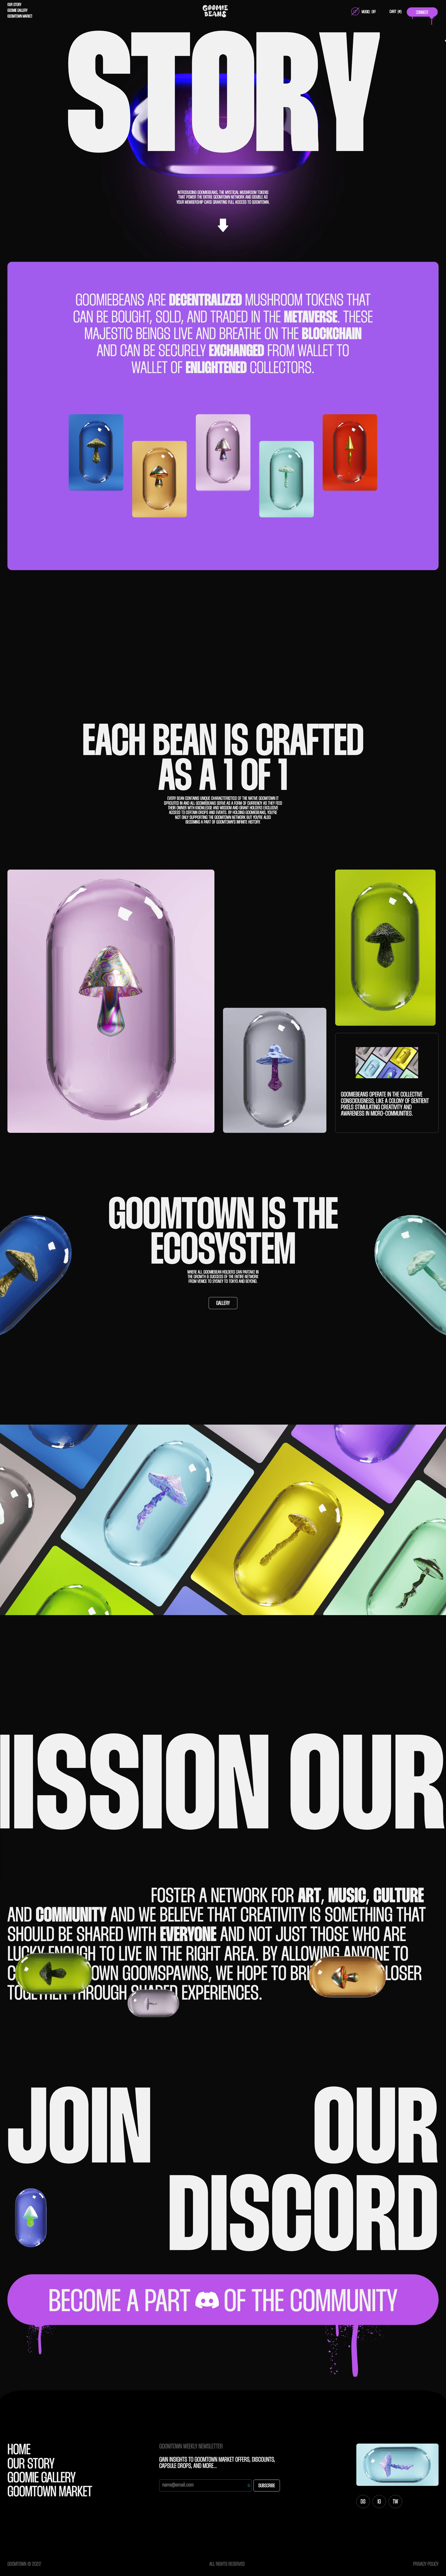 Goomiebeans Landing Page Example: Goomiebeans are decentralized mushroom tokens that can be bought, sold, and traded in the metaverse. These majestic beings are born and live on the blockchain and are securely exchanged from wallet to wallet of enlightened collectors.